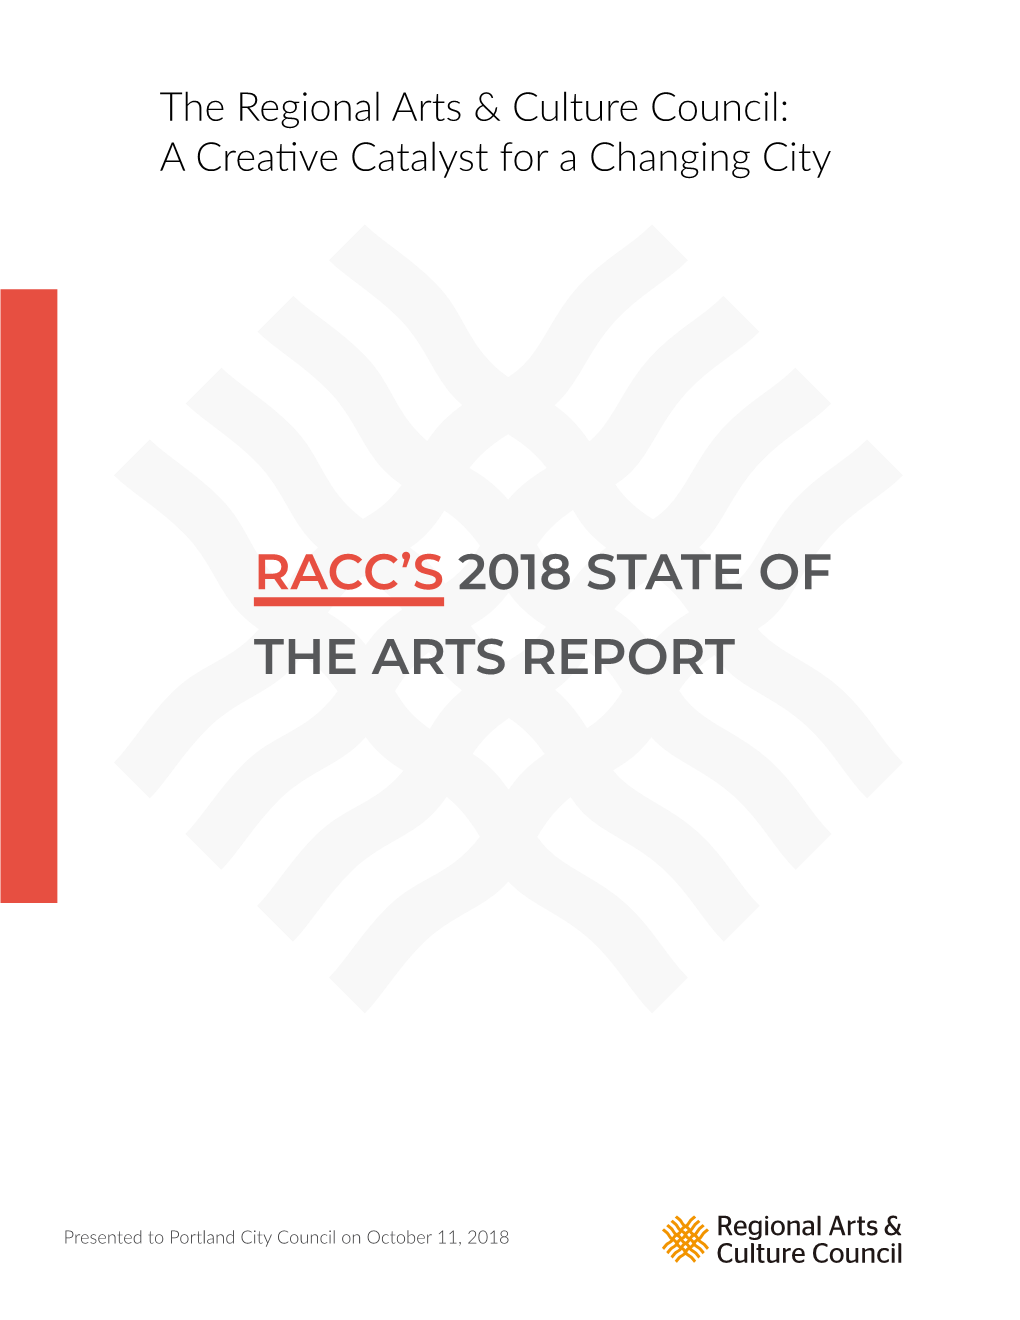 RACC's 2018 State of the Arts Report